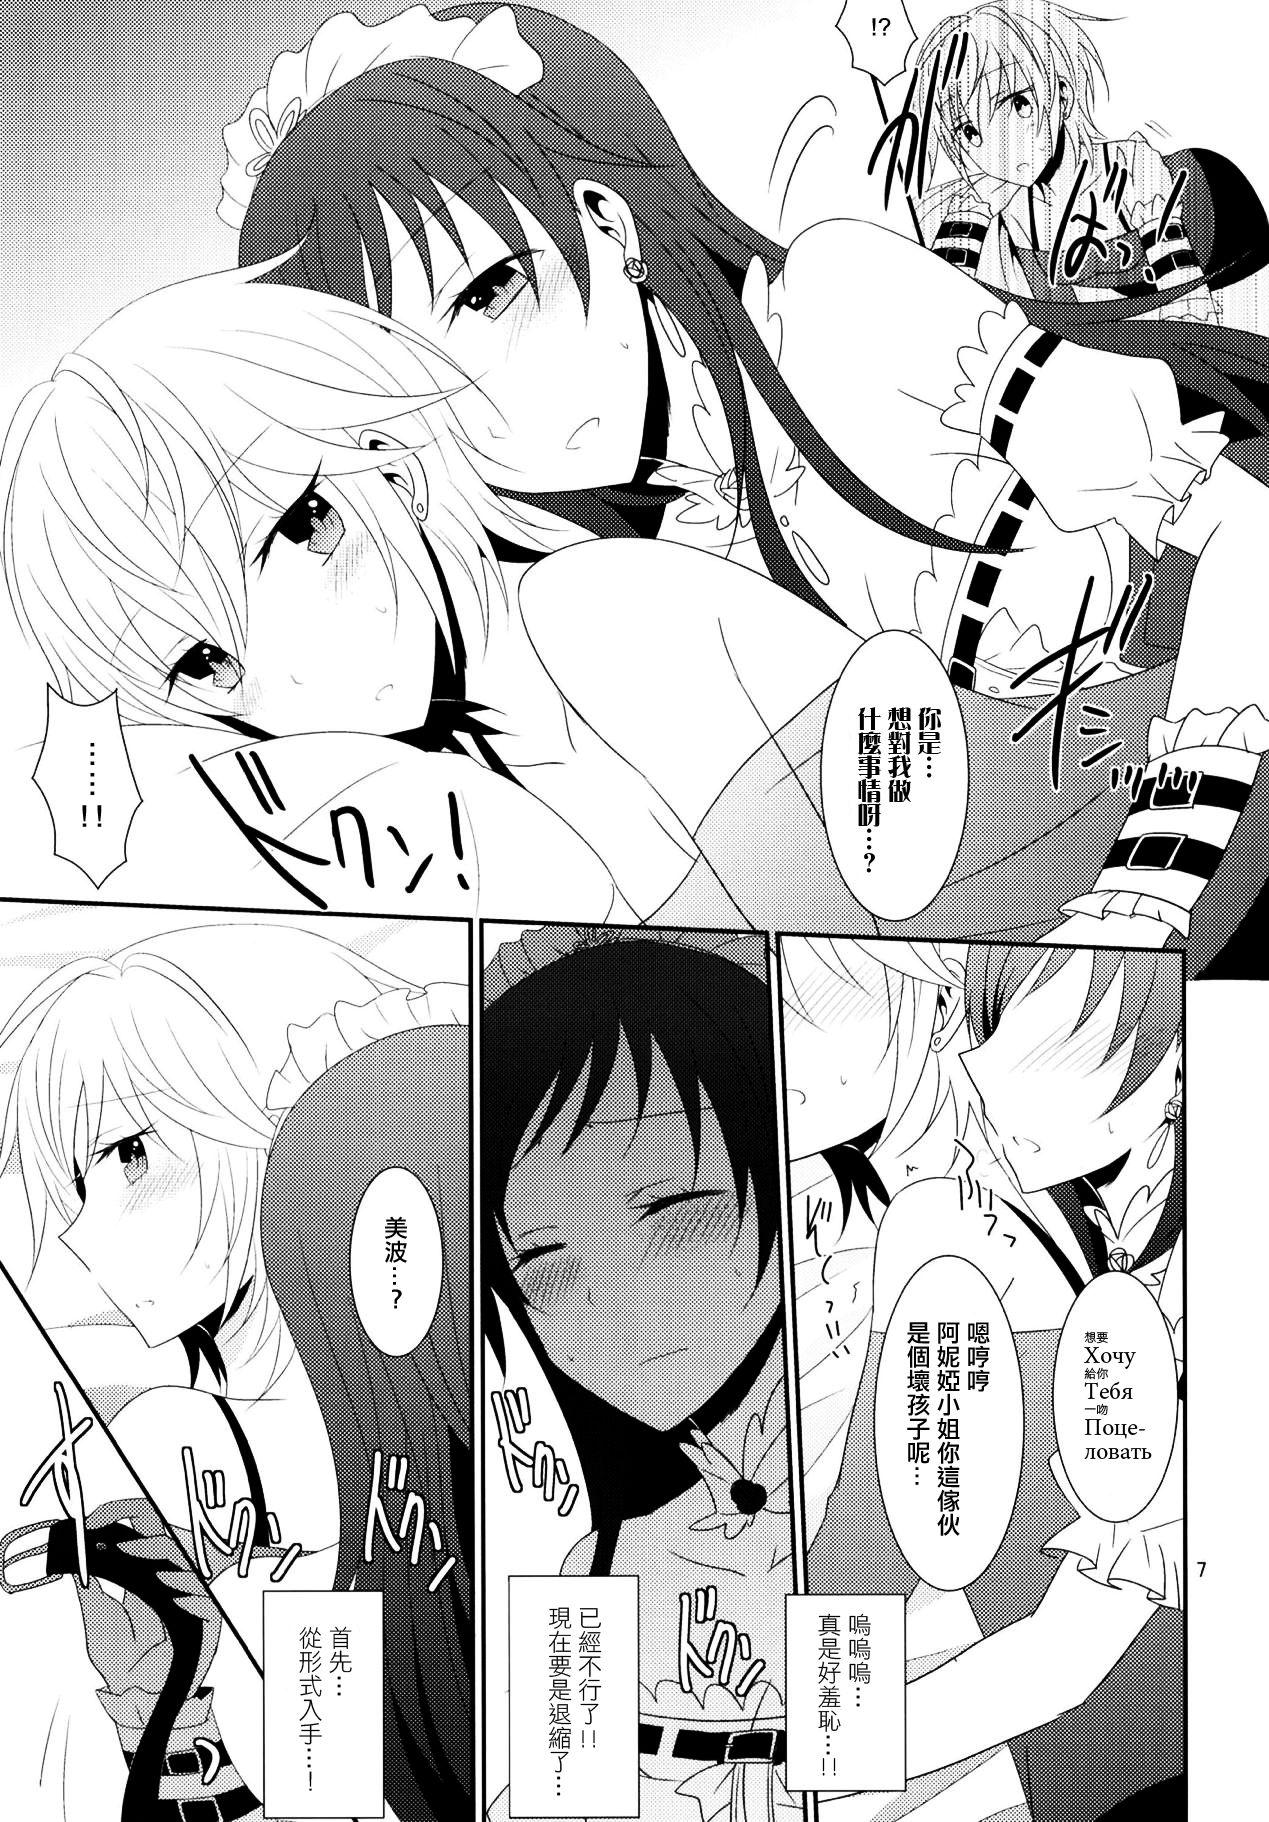 One SWEET MEMORIES - The idolmaster Blondes - Page 8